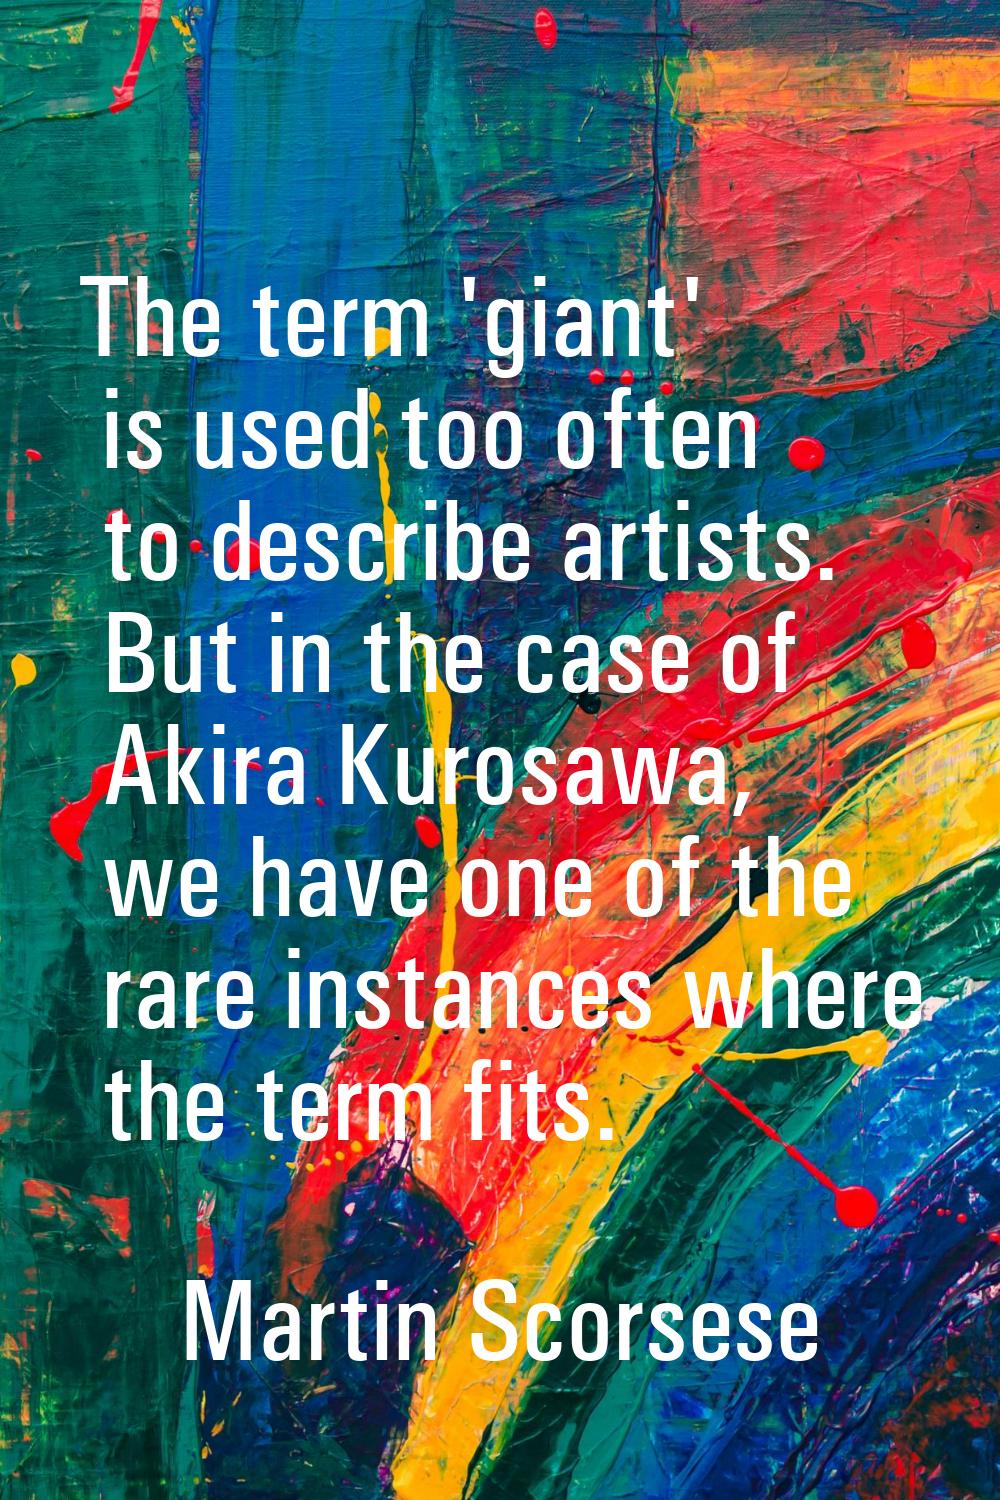 The term 'giant' is used too often to describe artists. But in the case of Akira Kurosawa, we have 